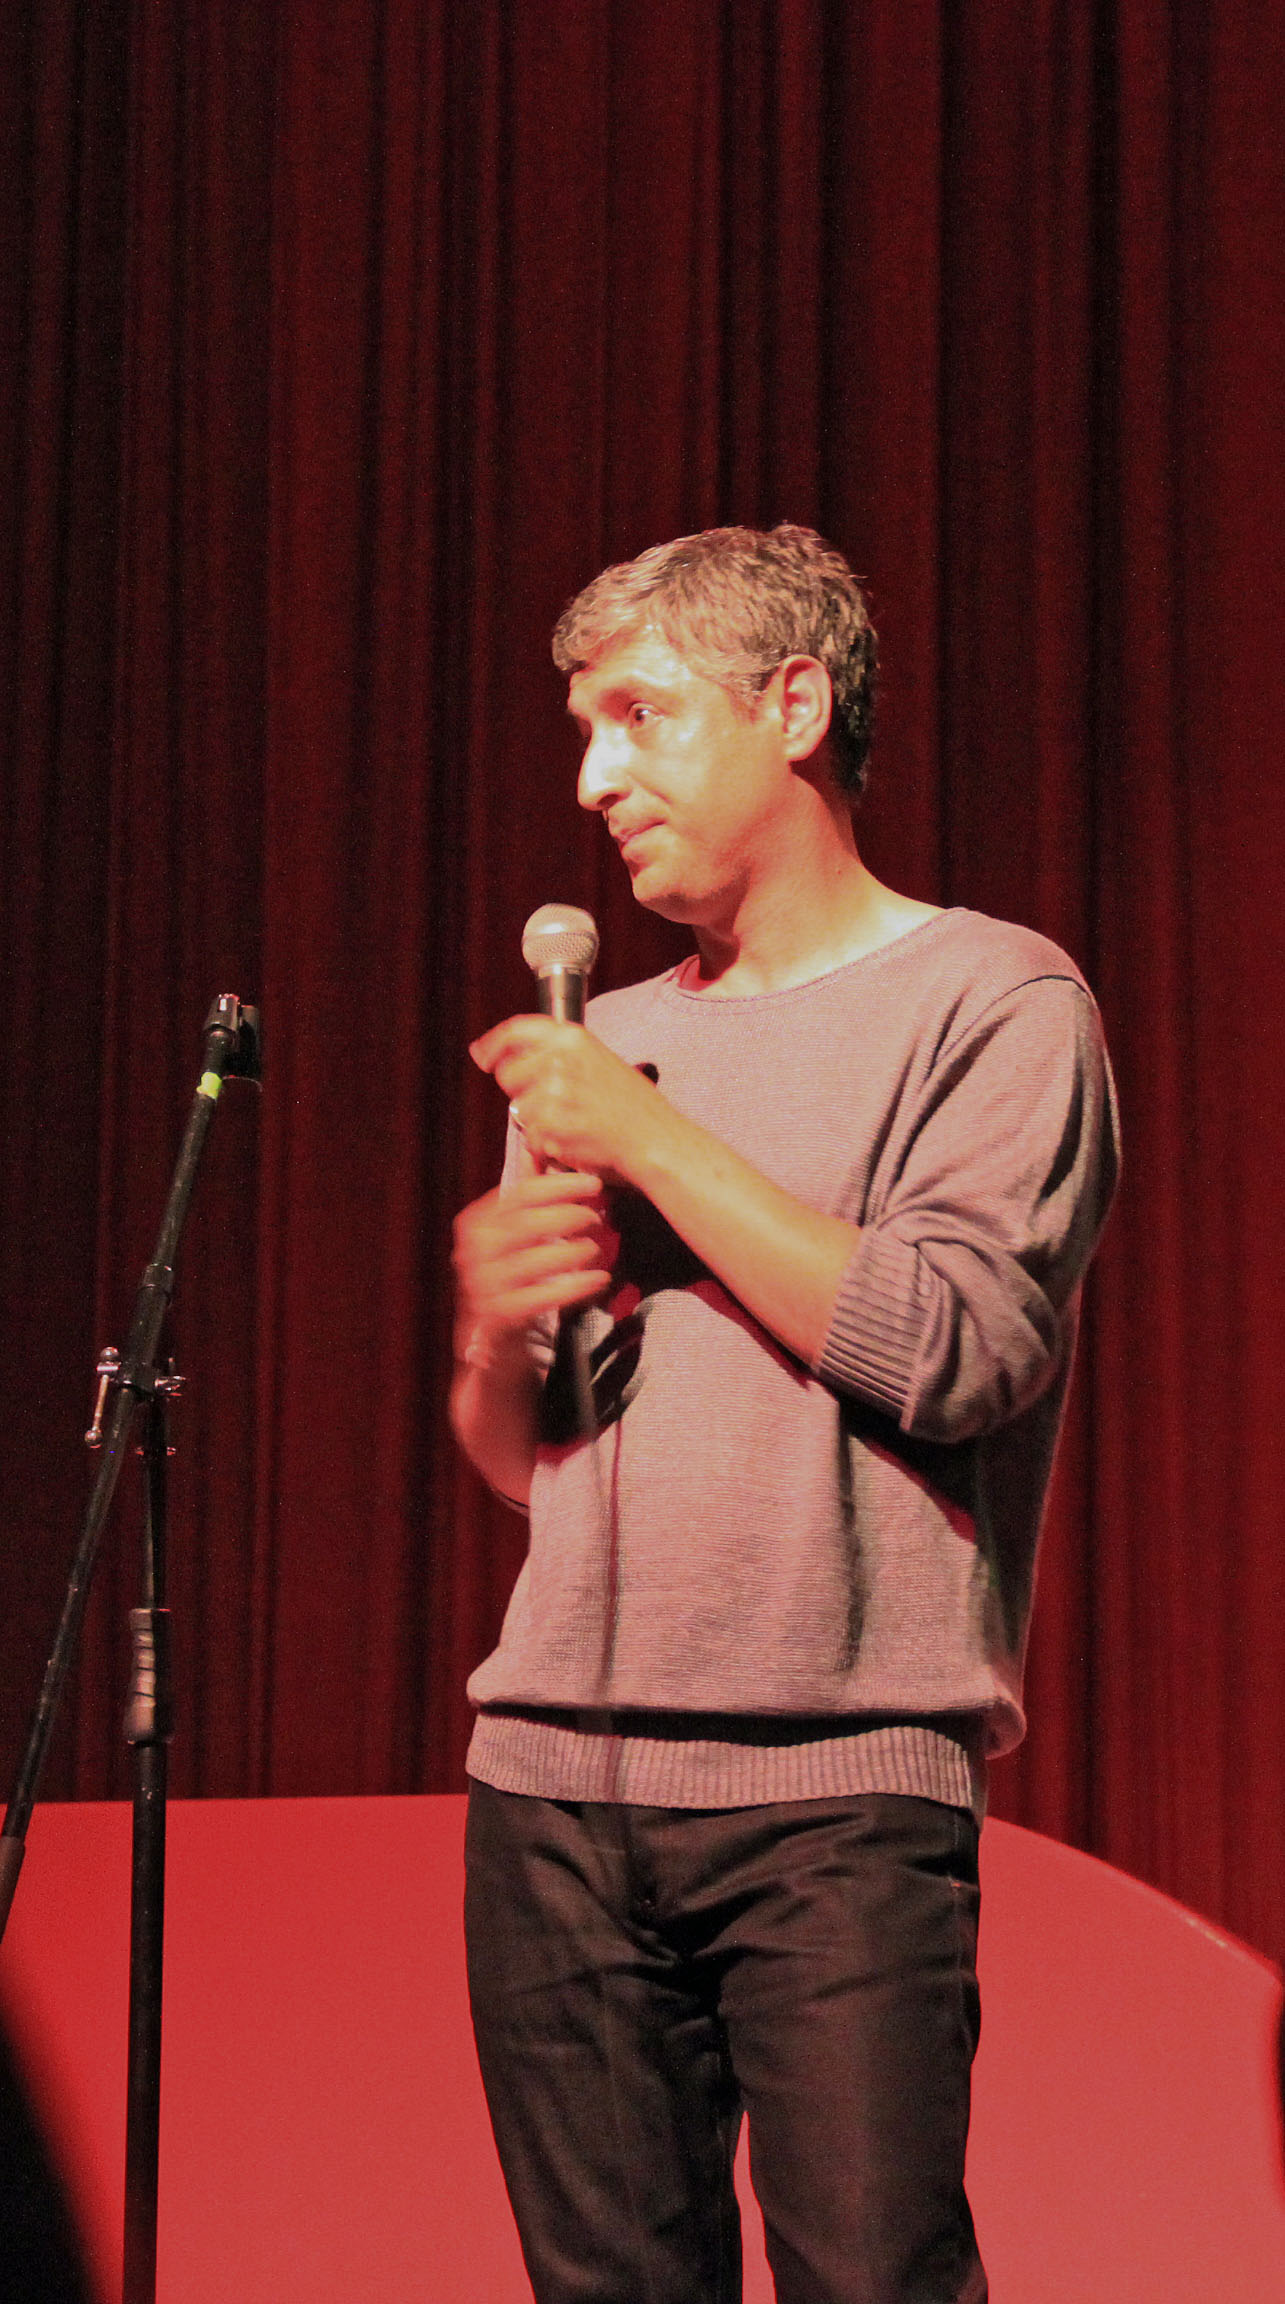 a man speaking with his microphone in front of a red curtain